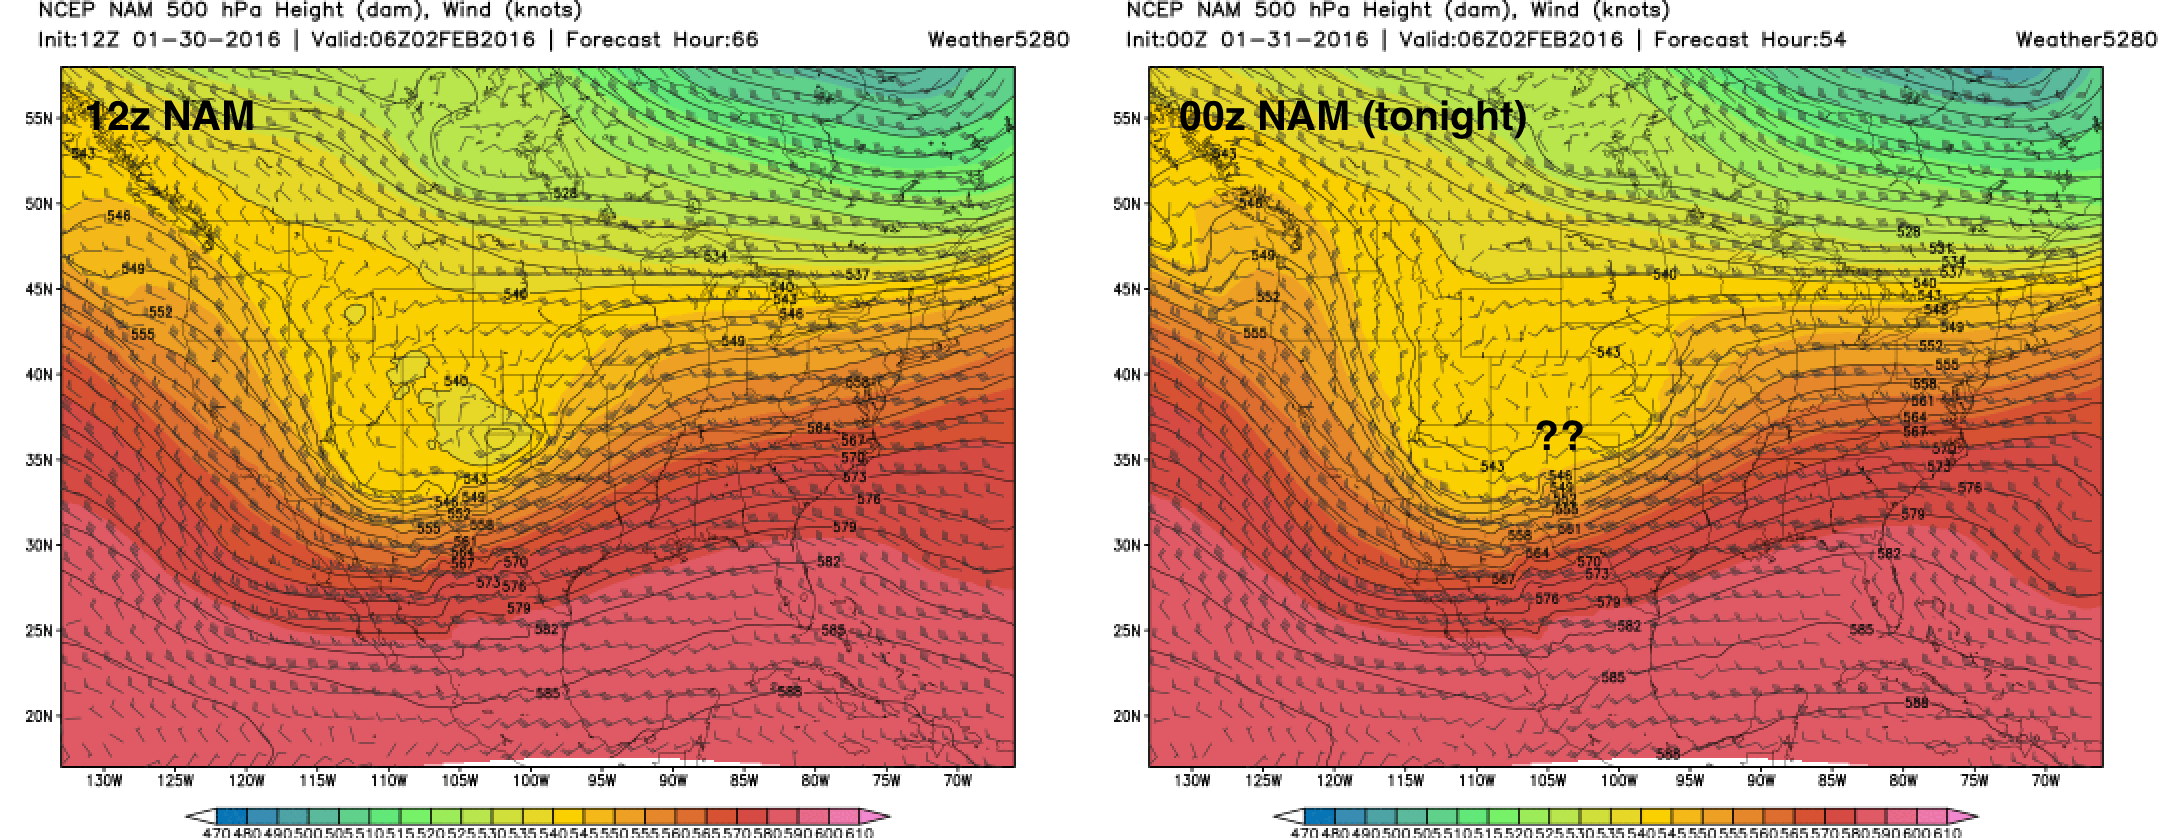 Forecast comparison from 12z (left) to 00z (right) for Monday night